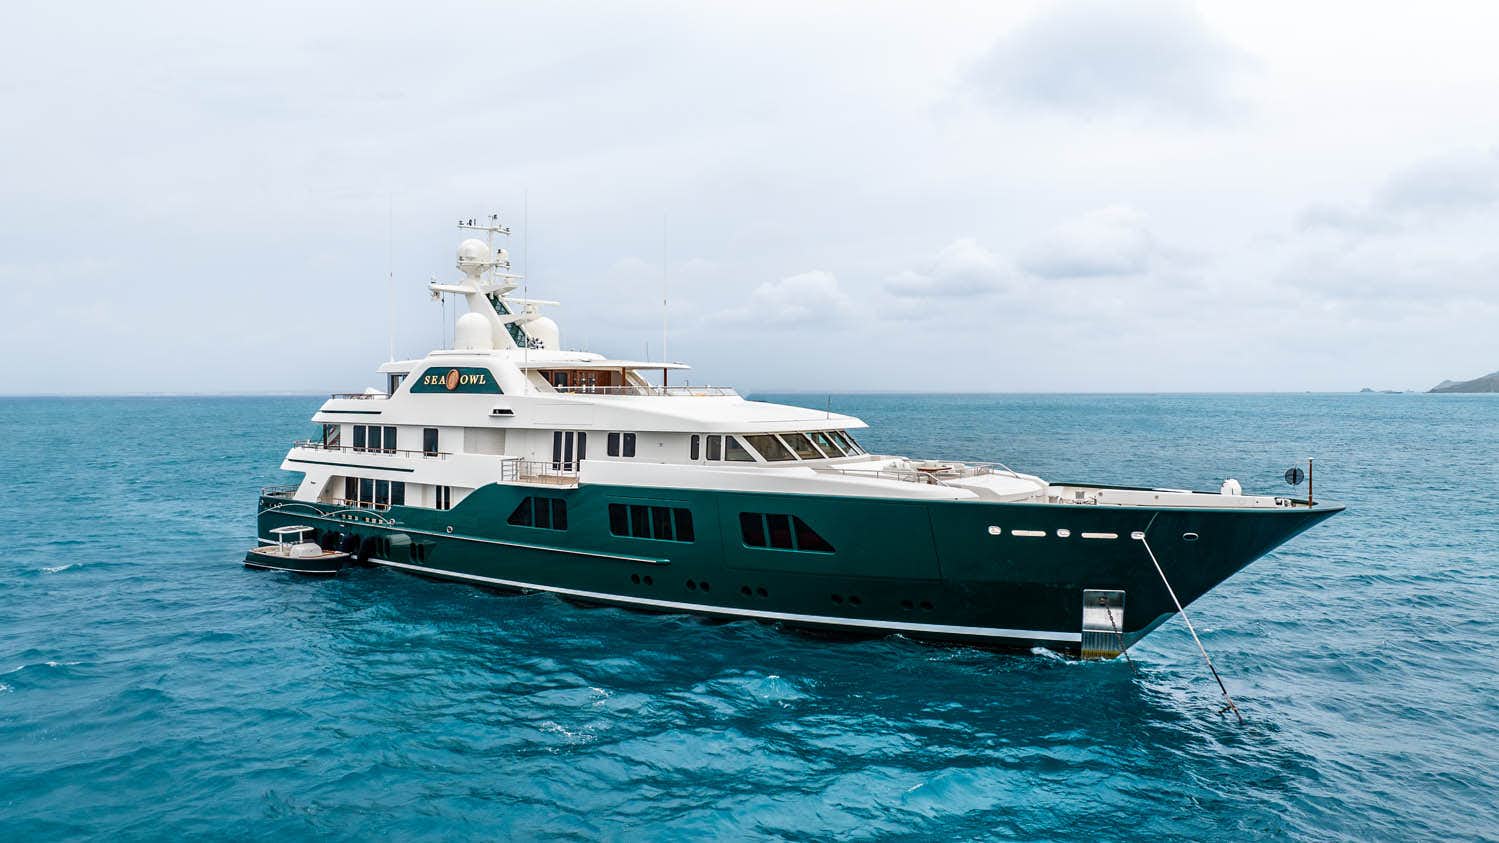 Watch Video for SEA OWL Yacht for Charter